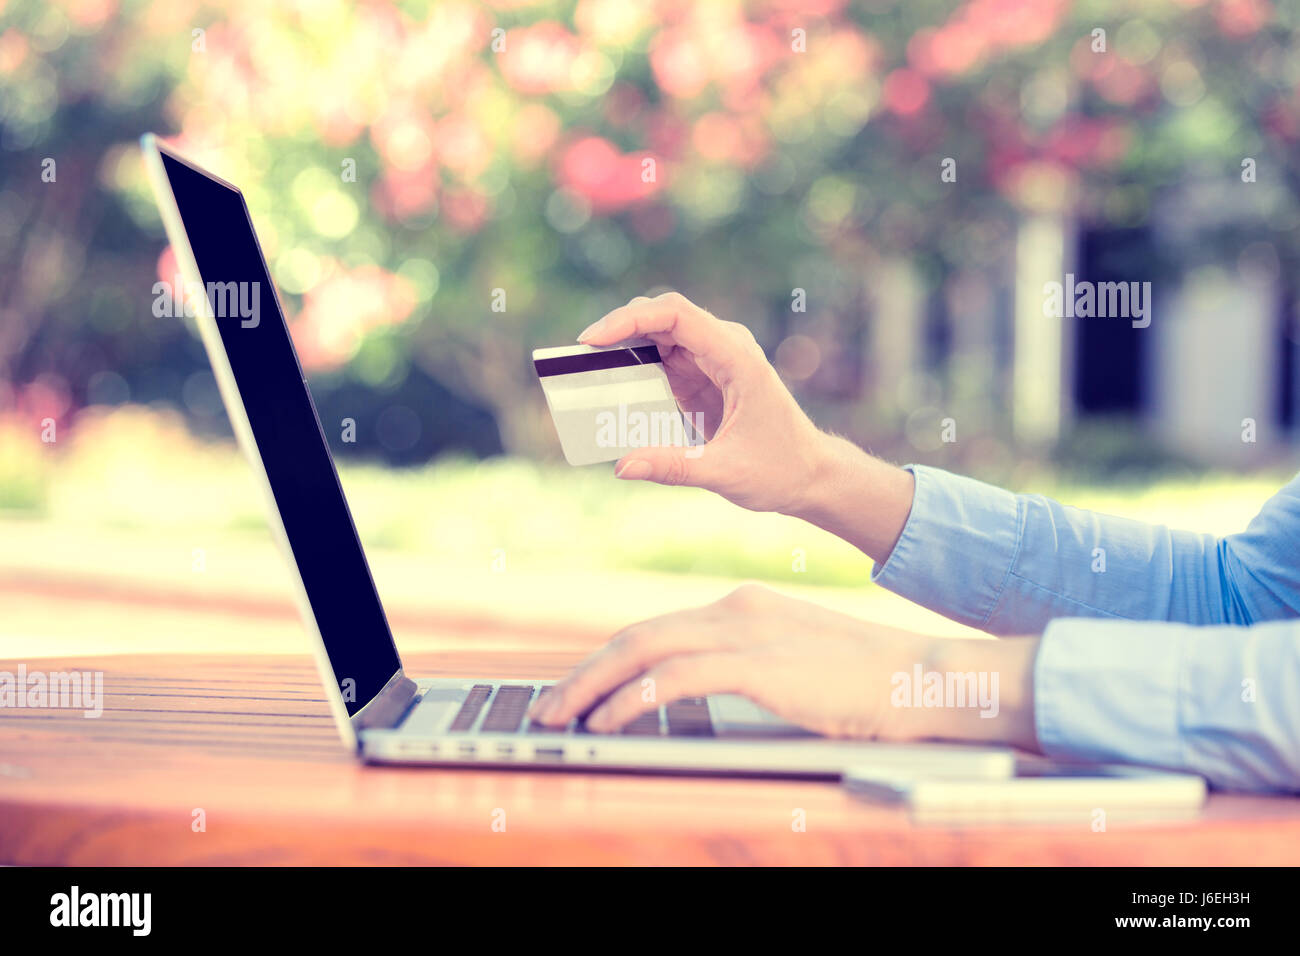 Closeup young woman hands holding credit card and using computer laptop for online shopping or reporting lost card, fraudulent transaction, isolated c Stock Photo